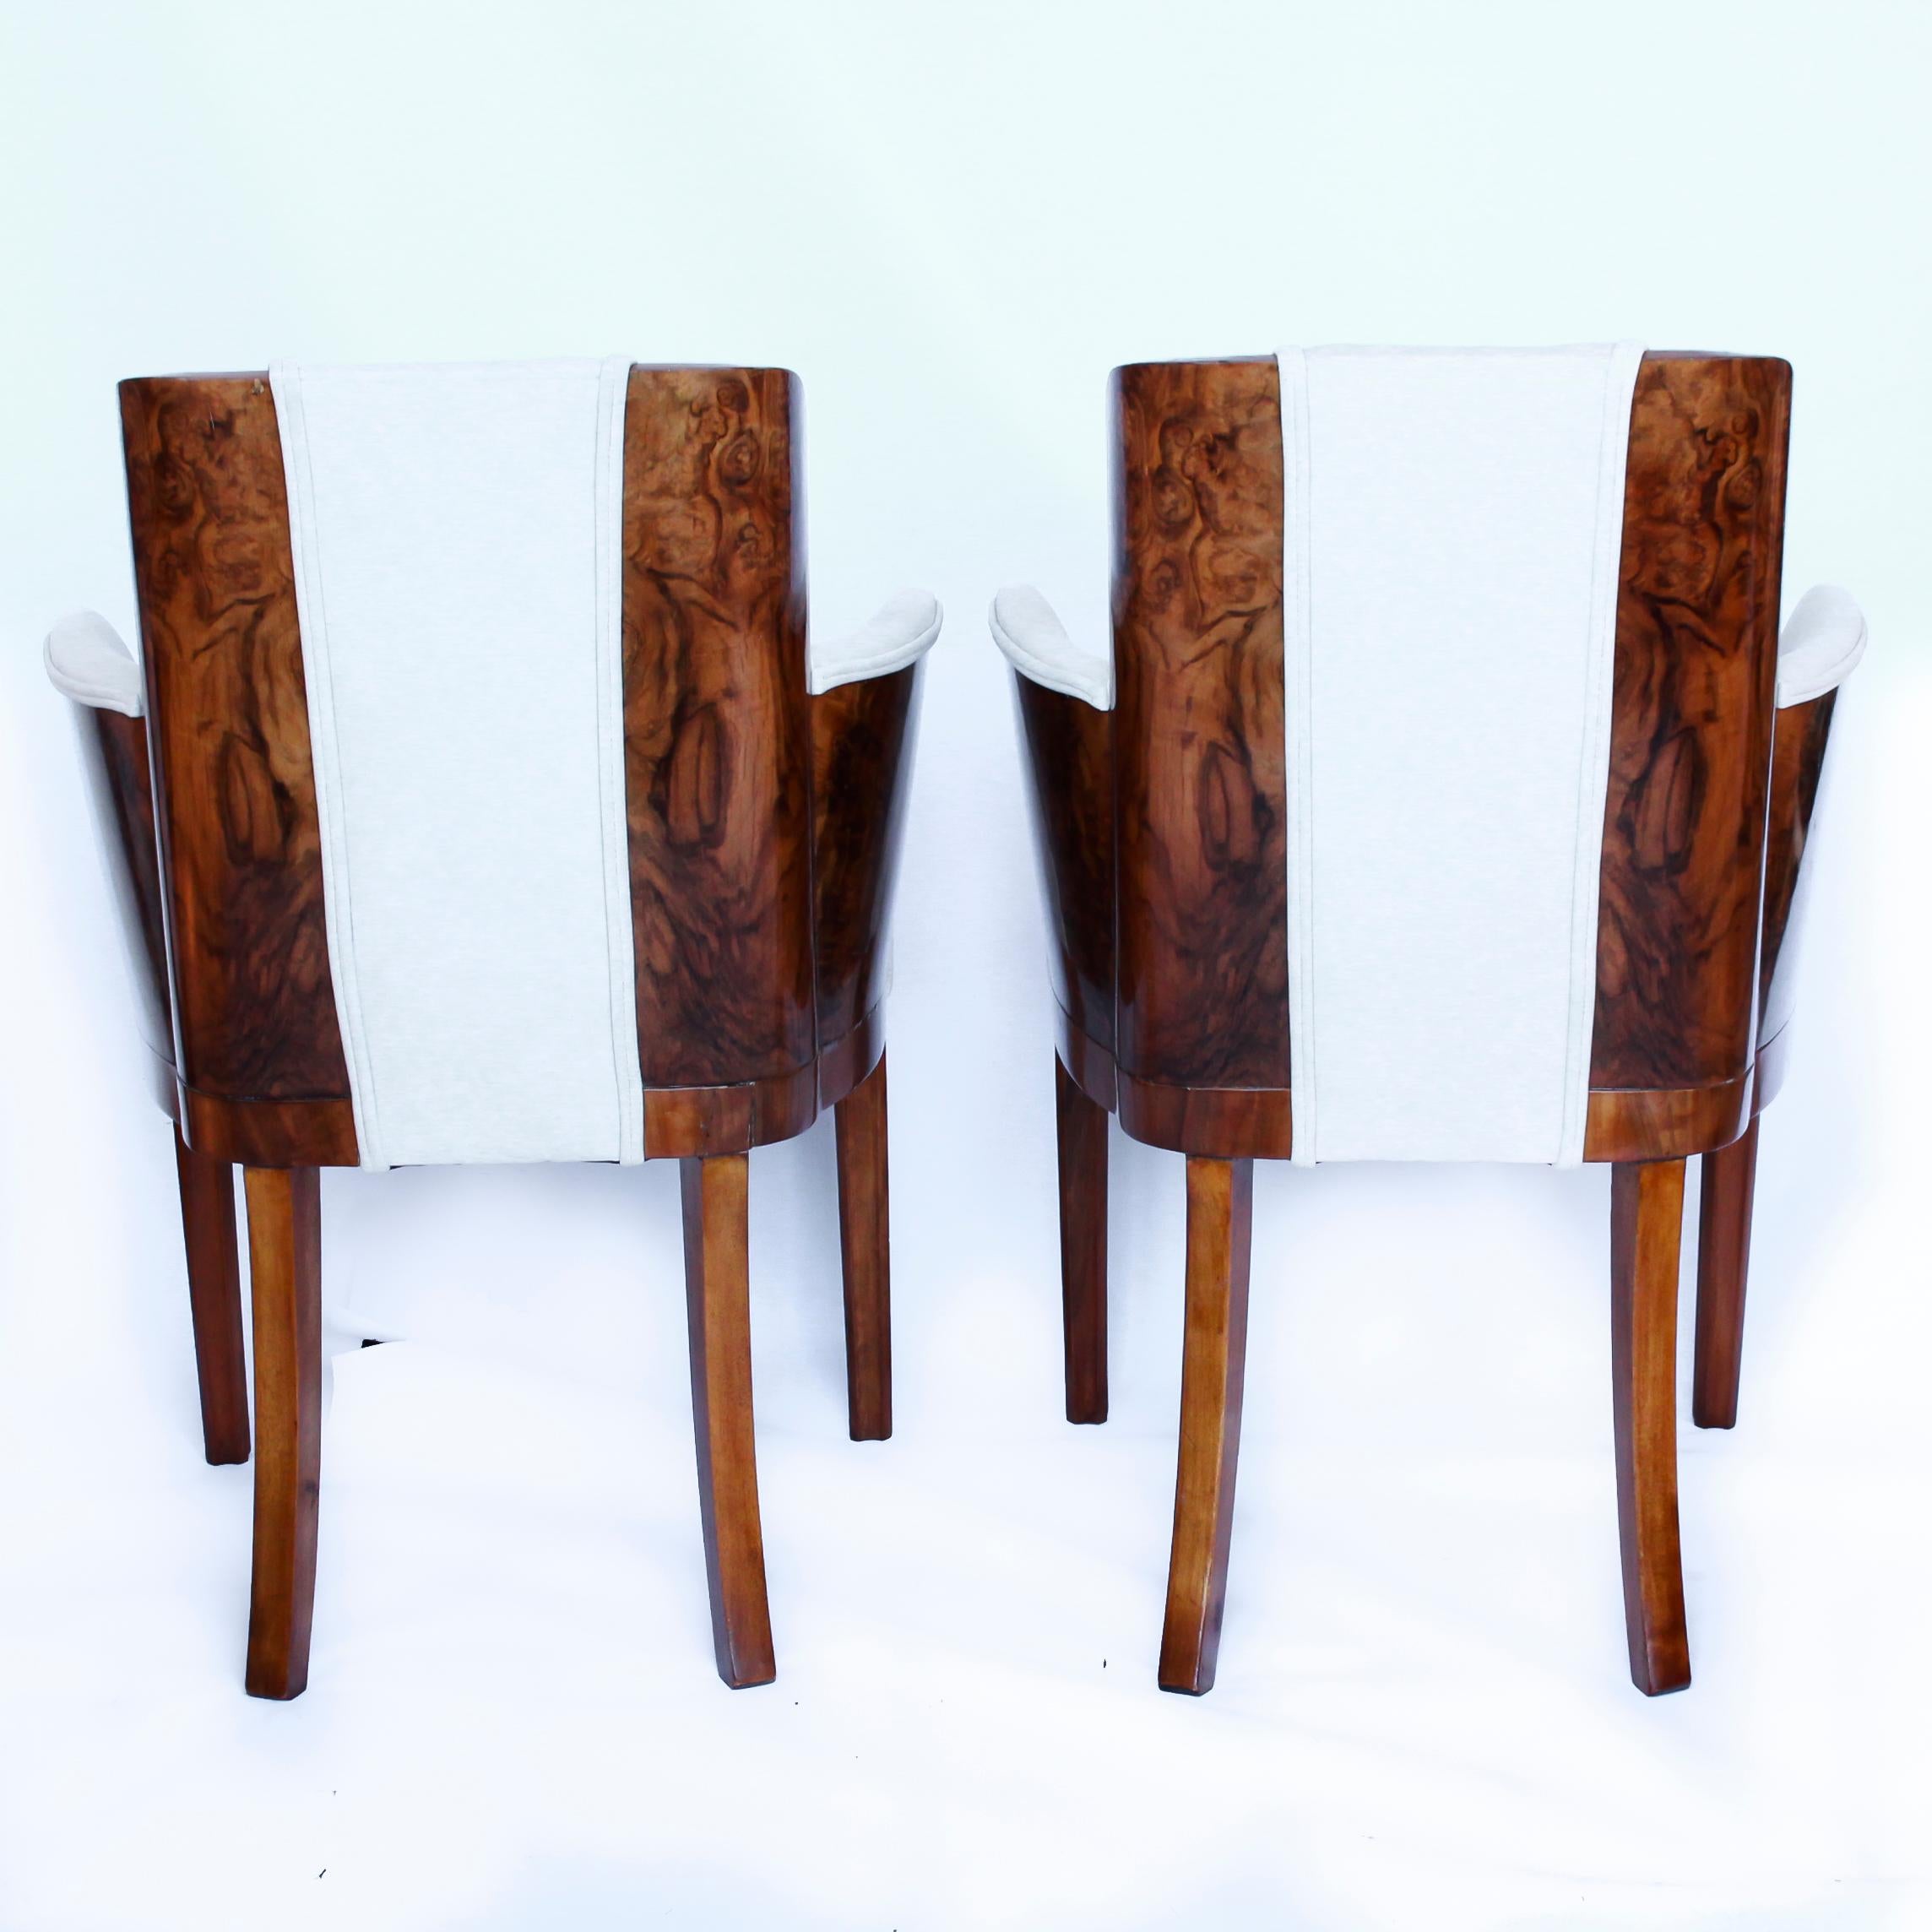 Mid-20th Century Art Deco 8-Seat Dining Suite by Hille in Walnut Veneer London England 1930